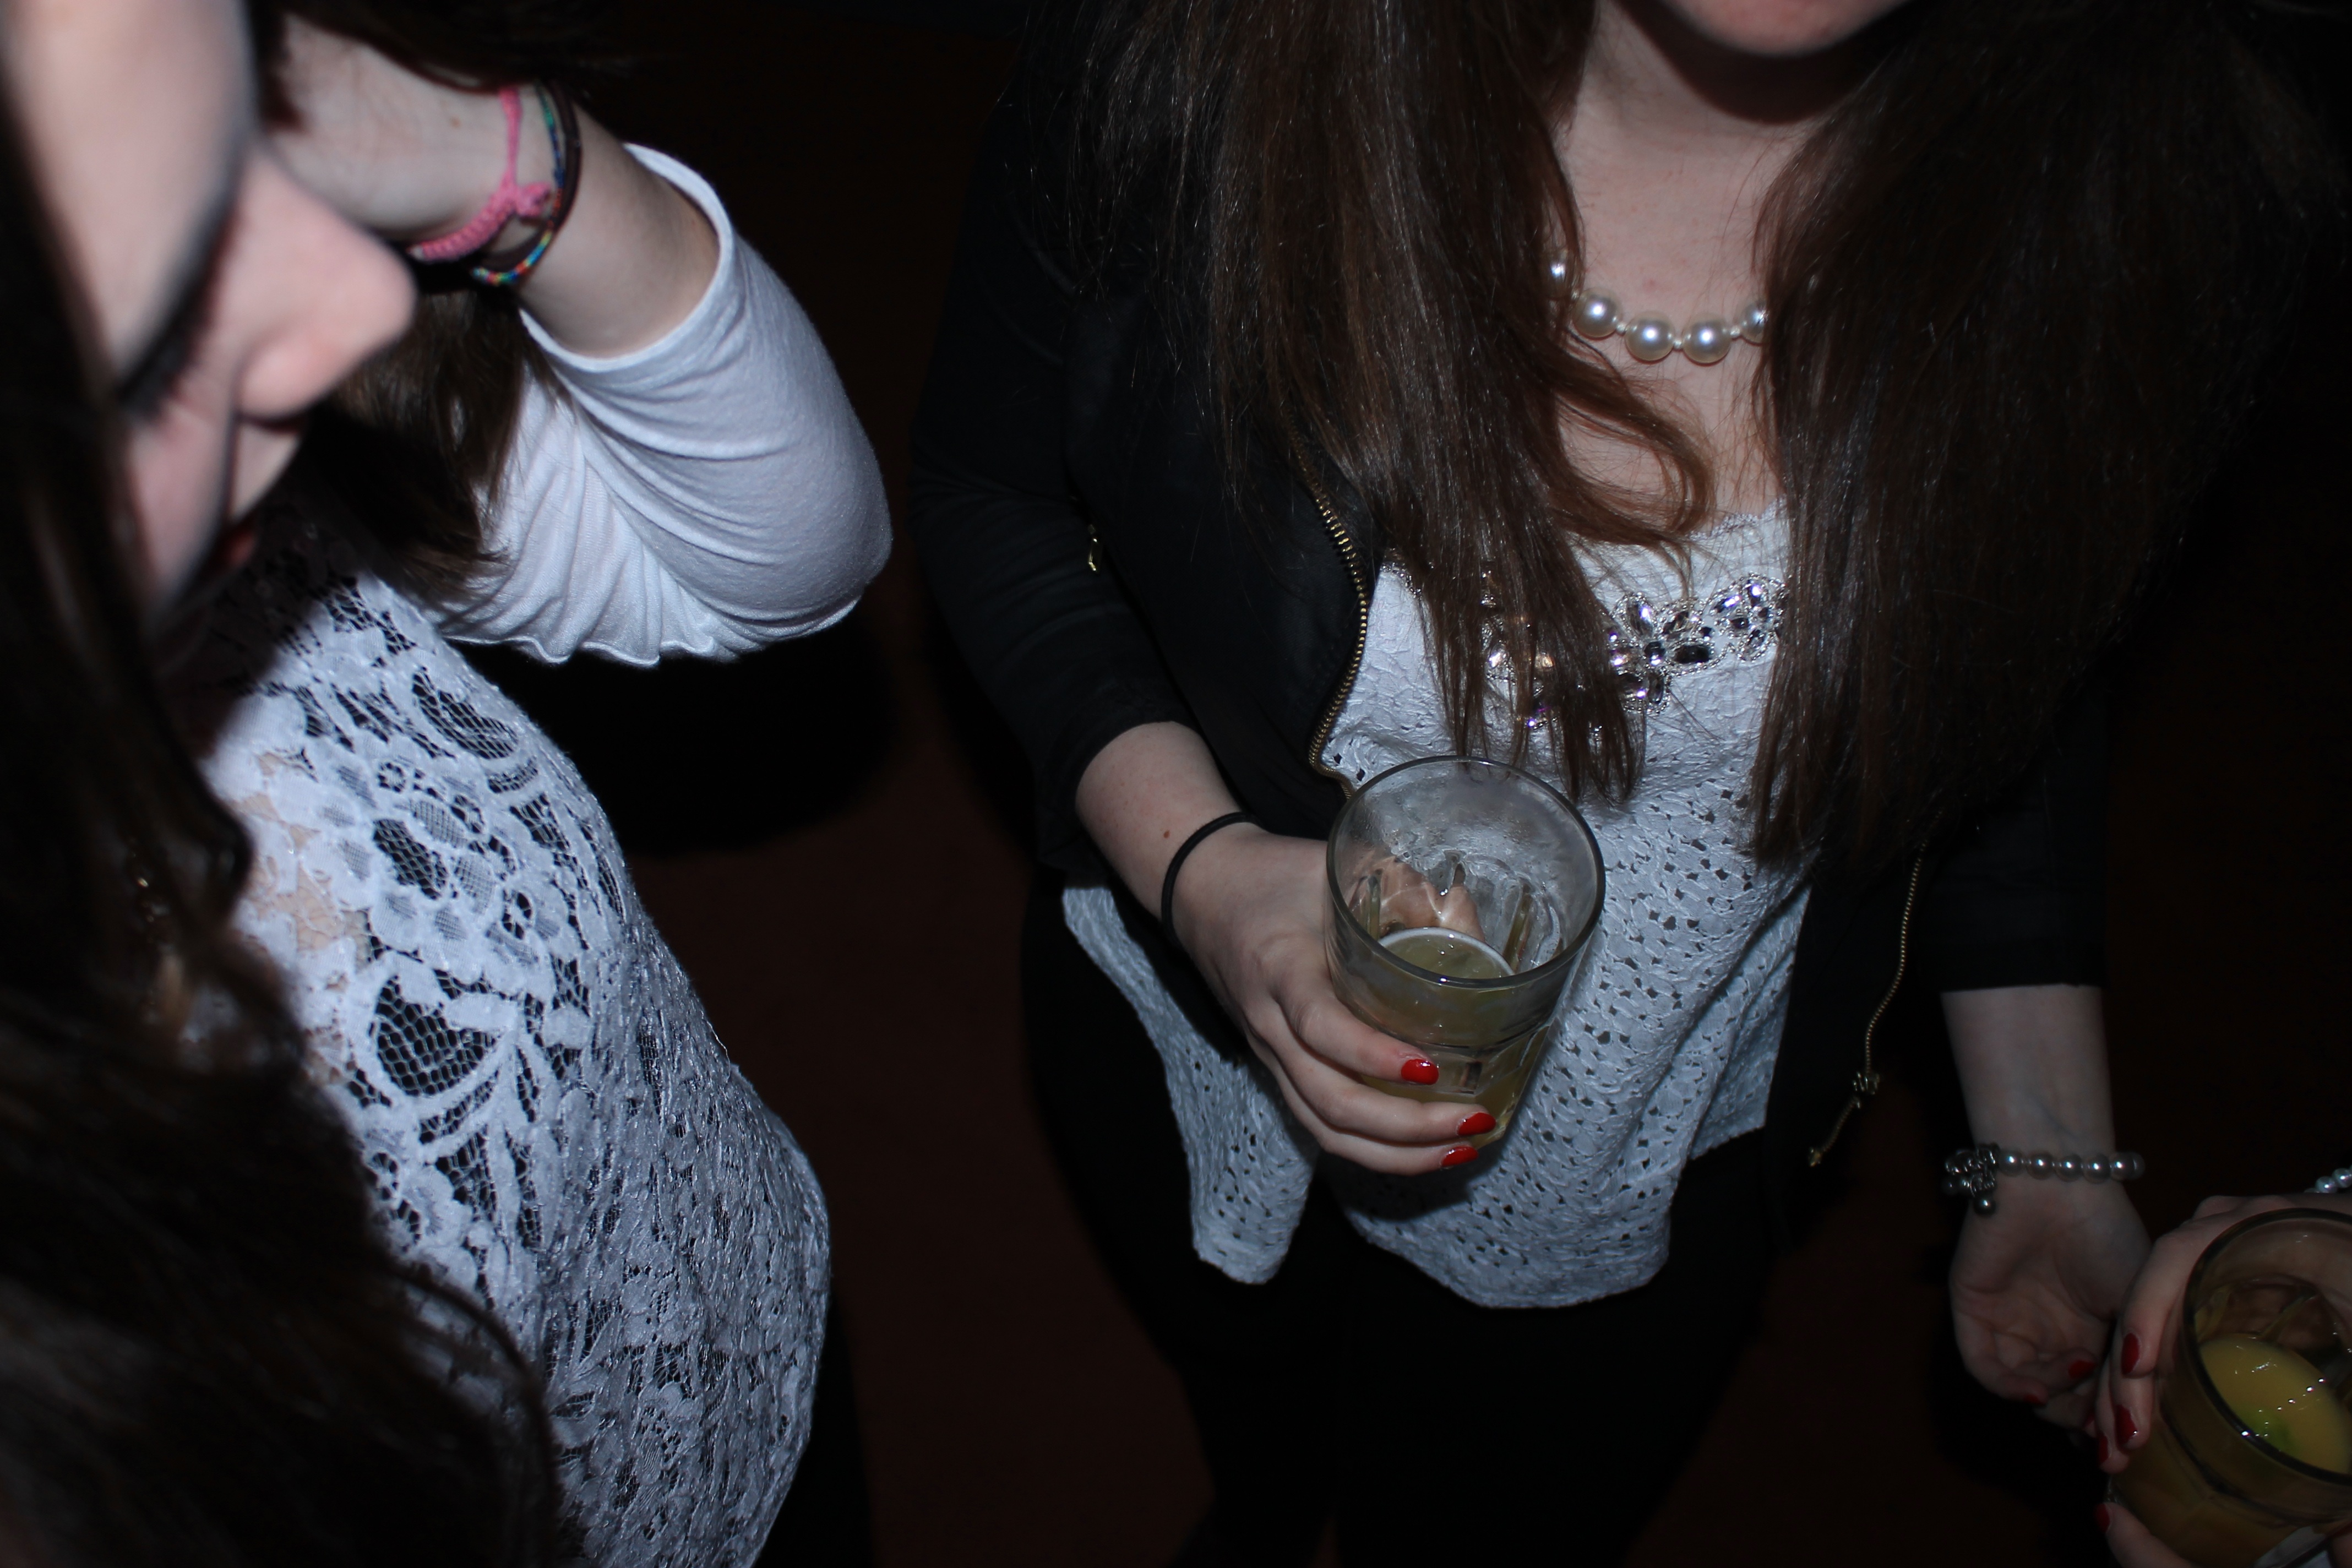 Teen girls holding drinks at a party.